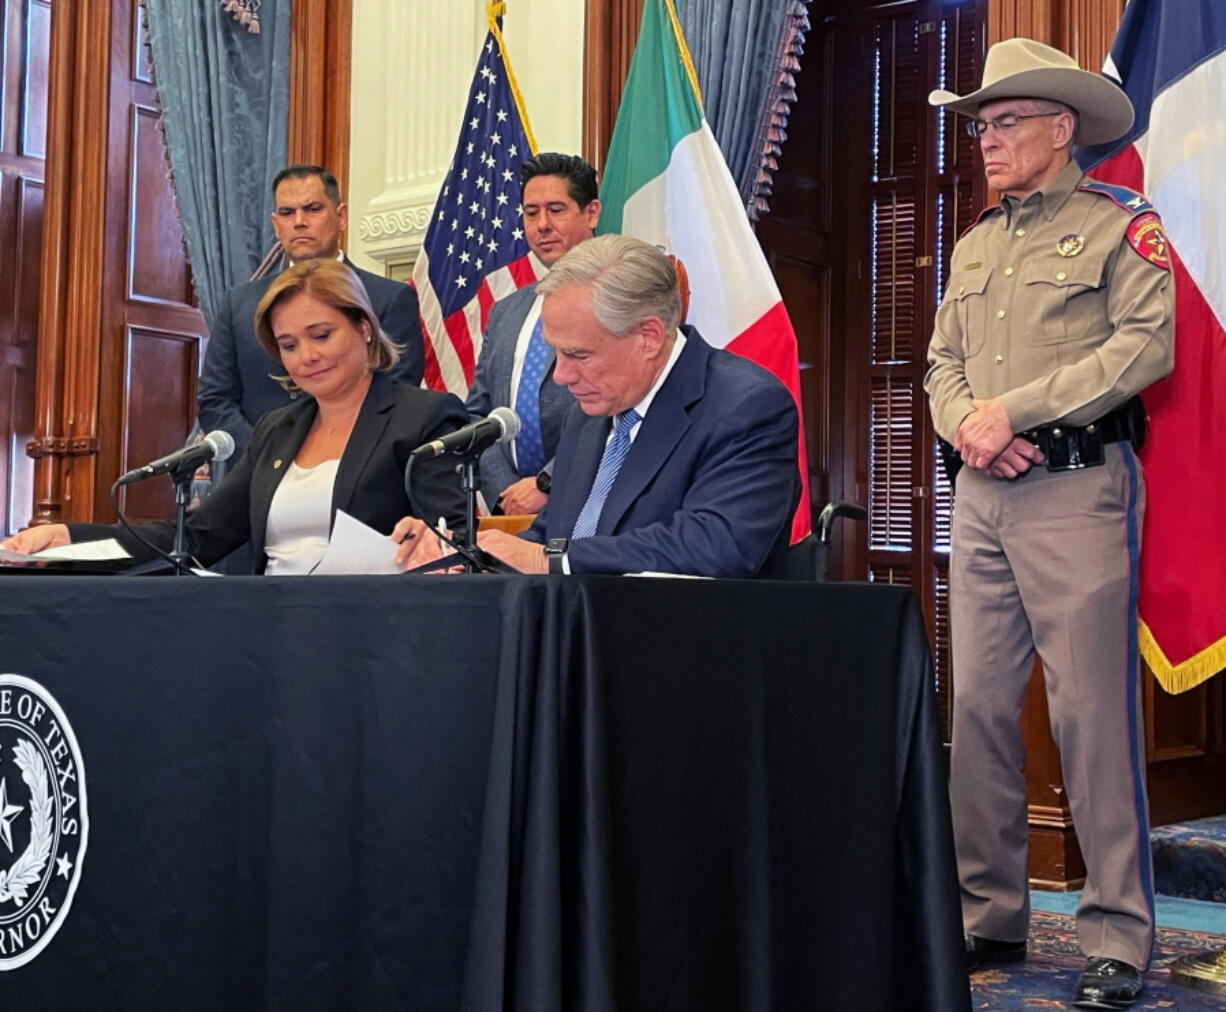 Texas Gov. Greg Abbott signs a border security agreement with Chihuahua Gov. Maru Campos Galvan in Austin, Texas on Thursday, April 14, 2022.